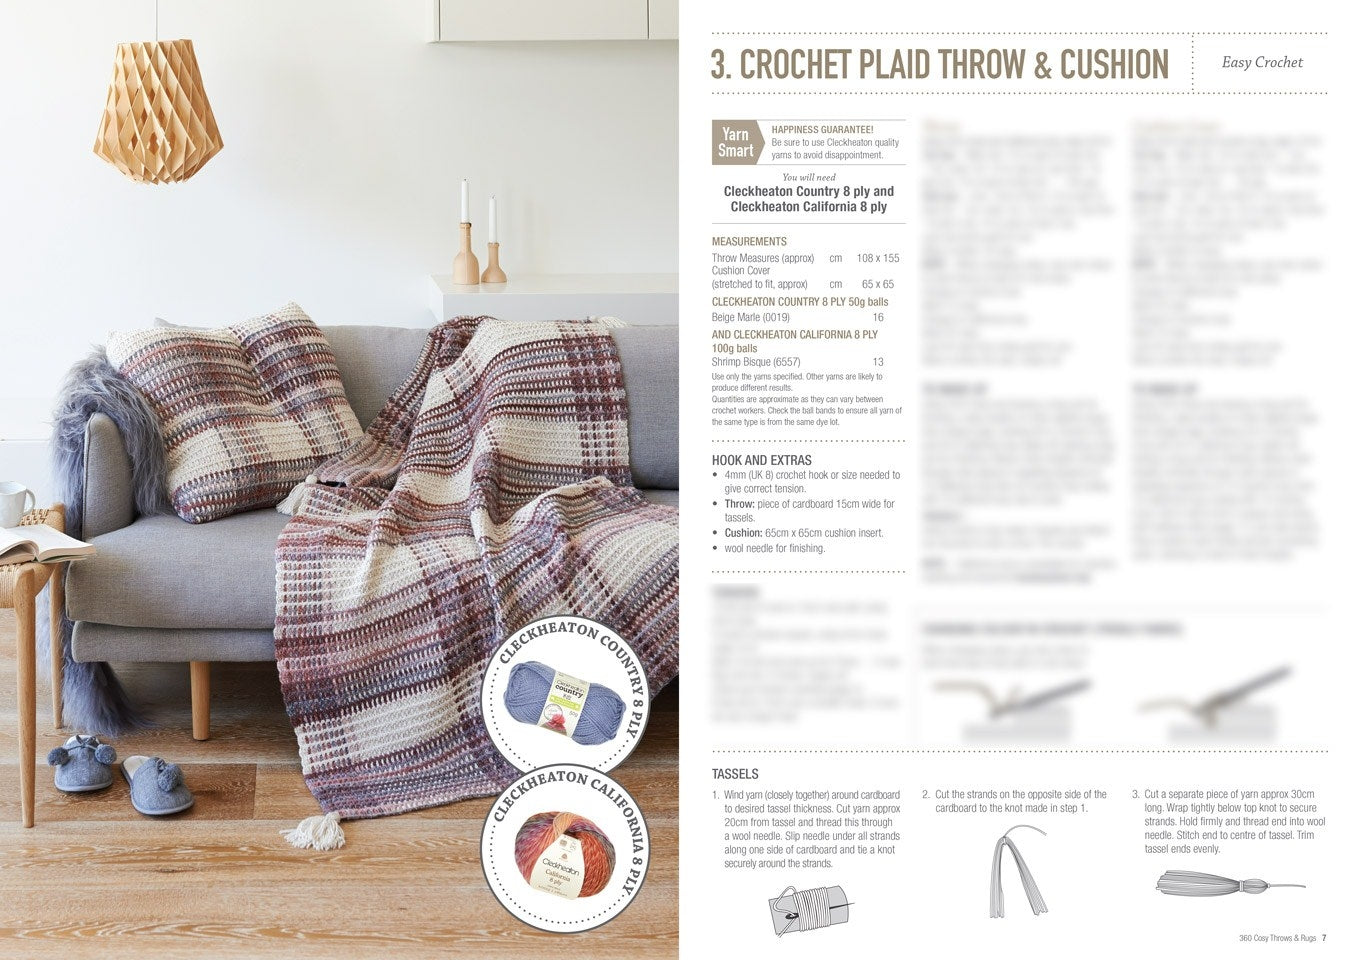 Cosy Throws & Rugs - Book 360